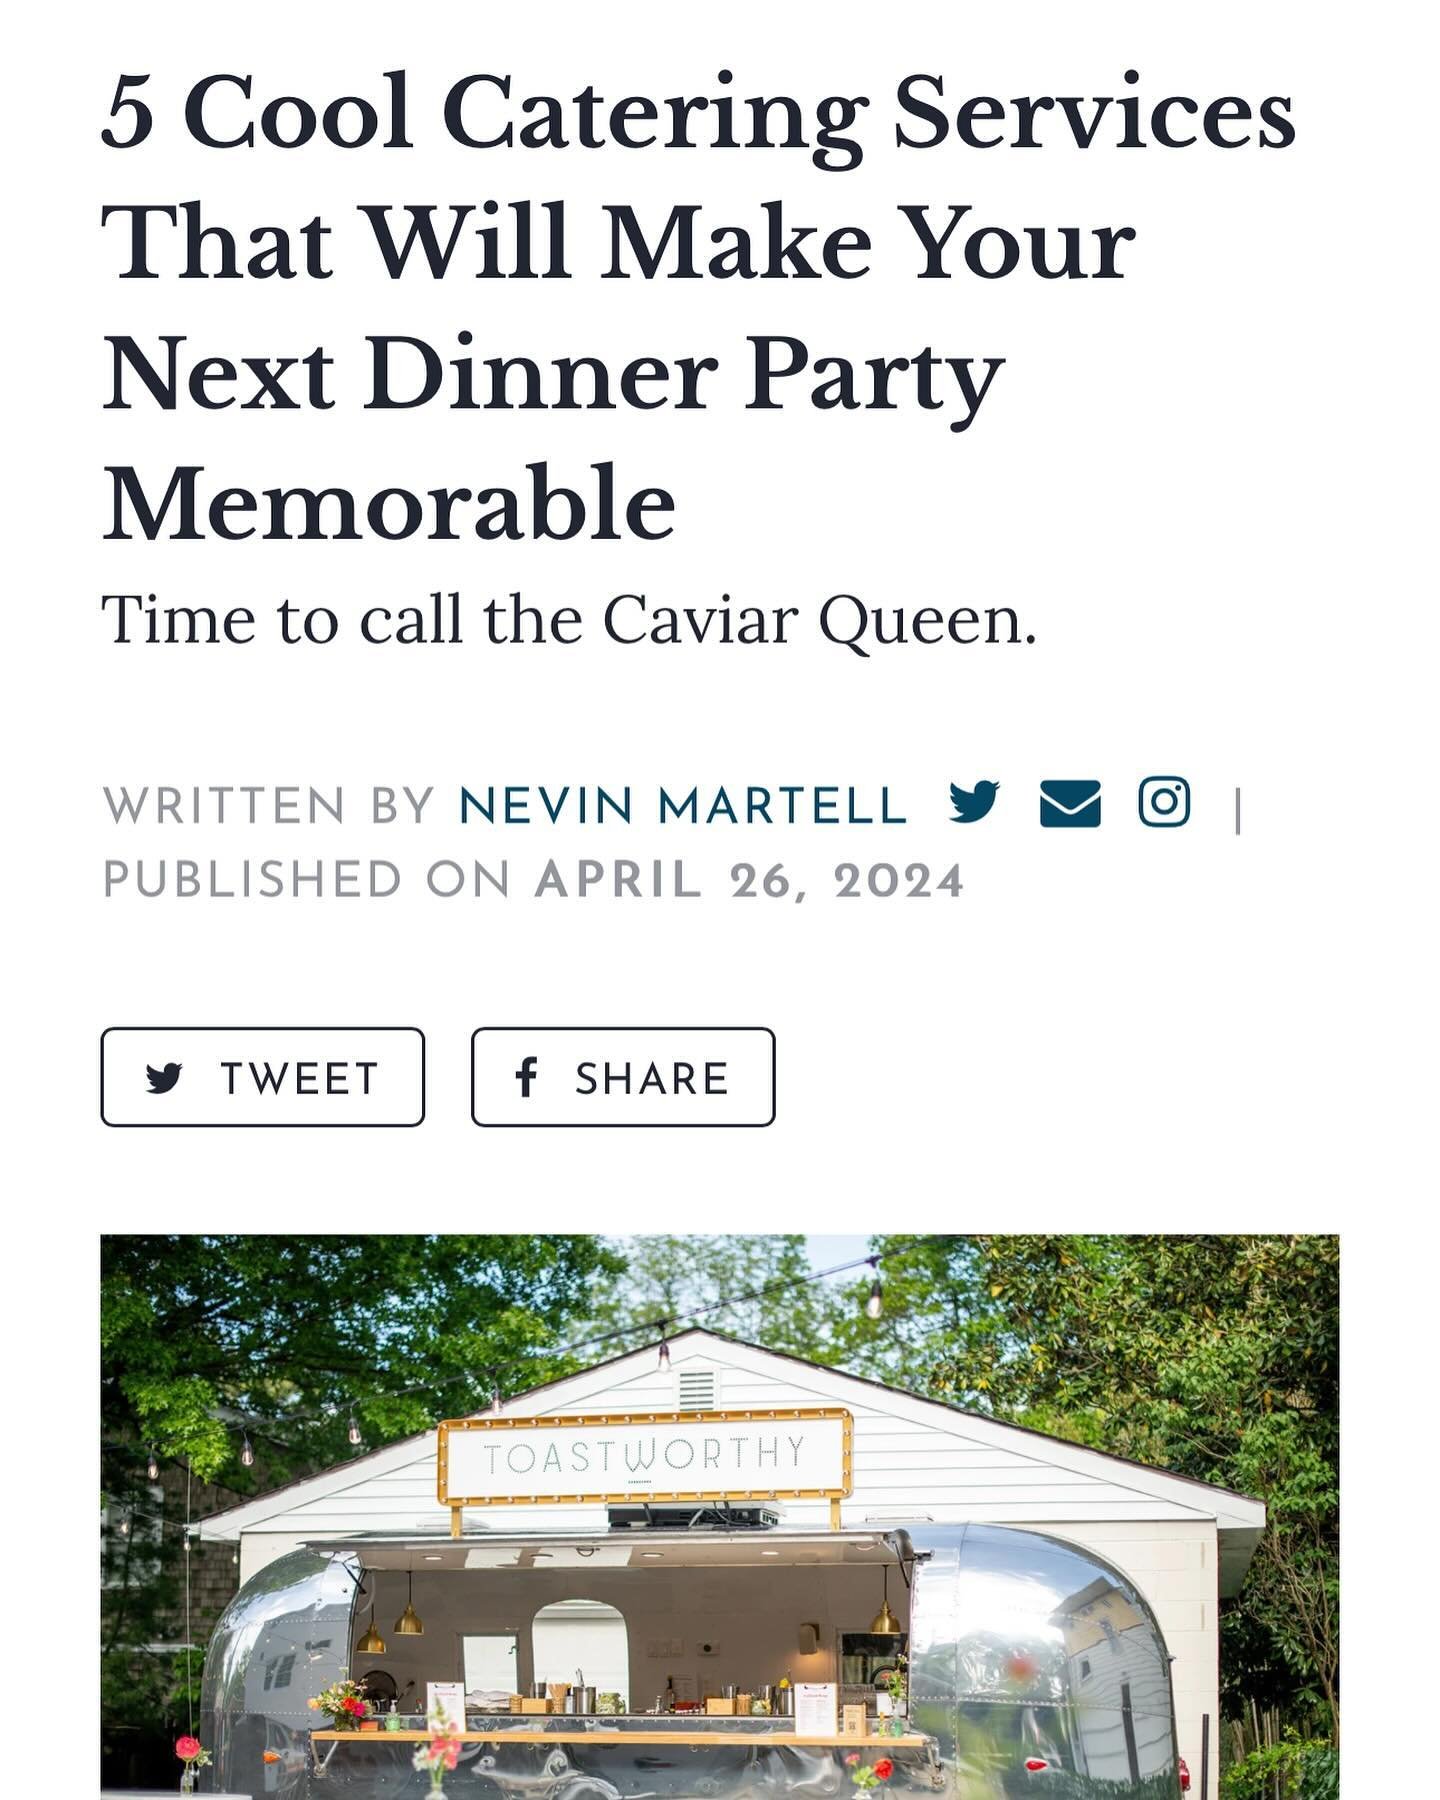 The Cocktail Gurus, we&rsquo;re blushing 🥰 

Thank you @washingtonianmag and @nevinmartell for featuring Toastworthy. Can&rsquo;t wait to toast with you this summer 🧡☀️

#CraftCocktails #MobileBar #EventCatering #Mixology #MobileBarService #Creativ